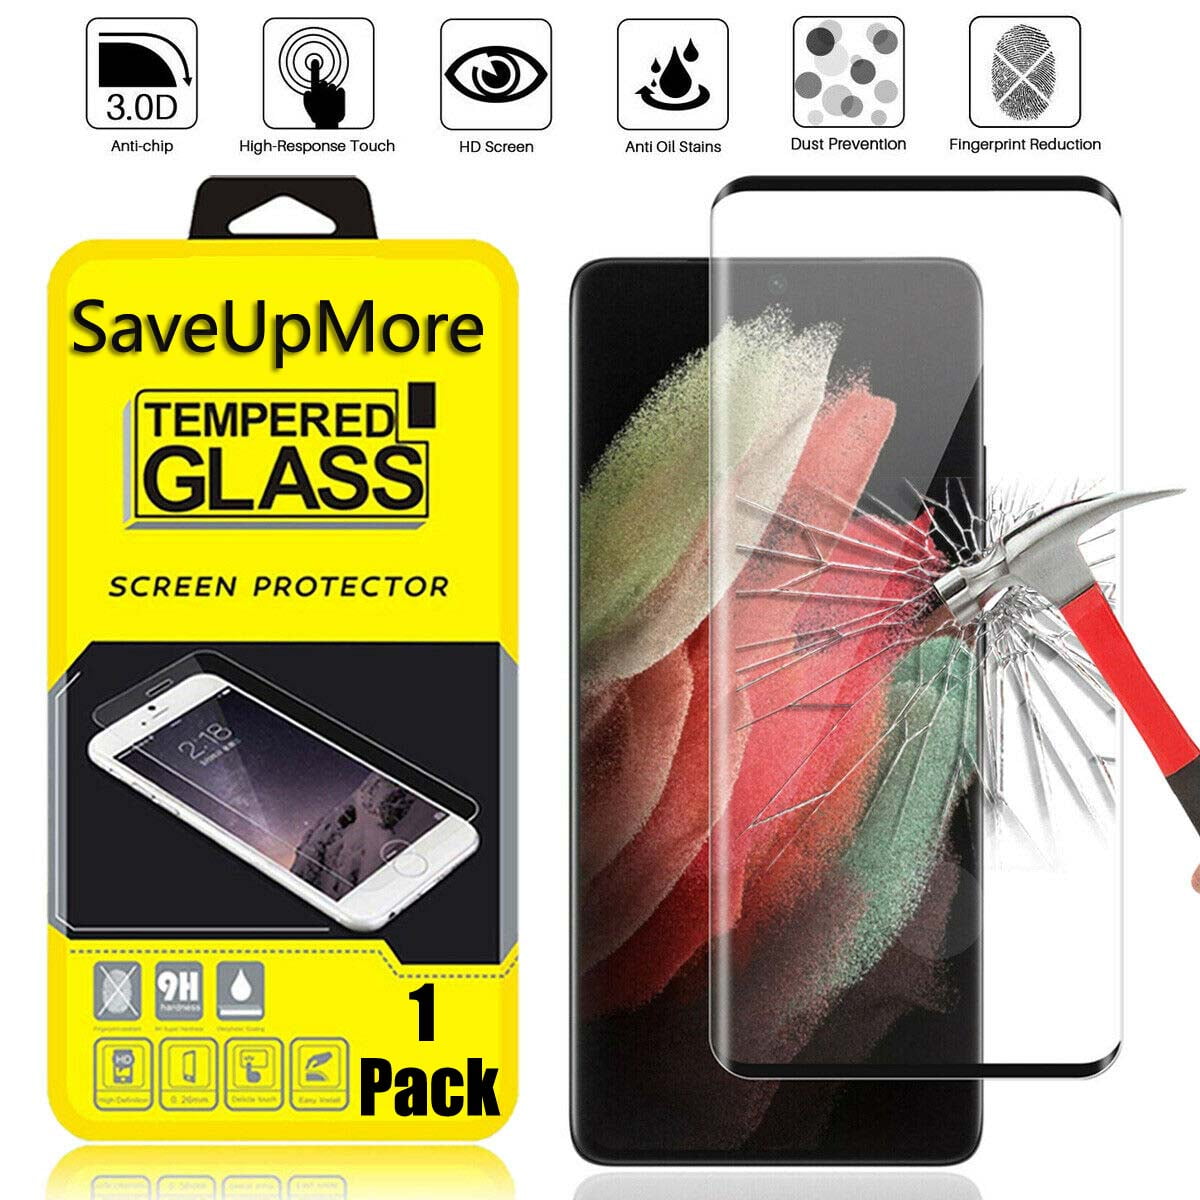 Support Fingerprint Unlock Bubble Free Flexible Screen Protector 3 Pack EGV Compatible with Samsung Galaxy S21 Plus 6.7-inch, Not Glass Easy Installation Tool 